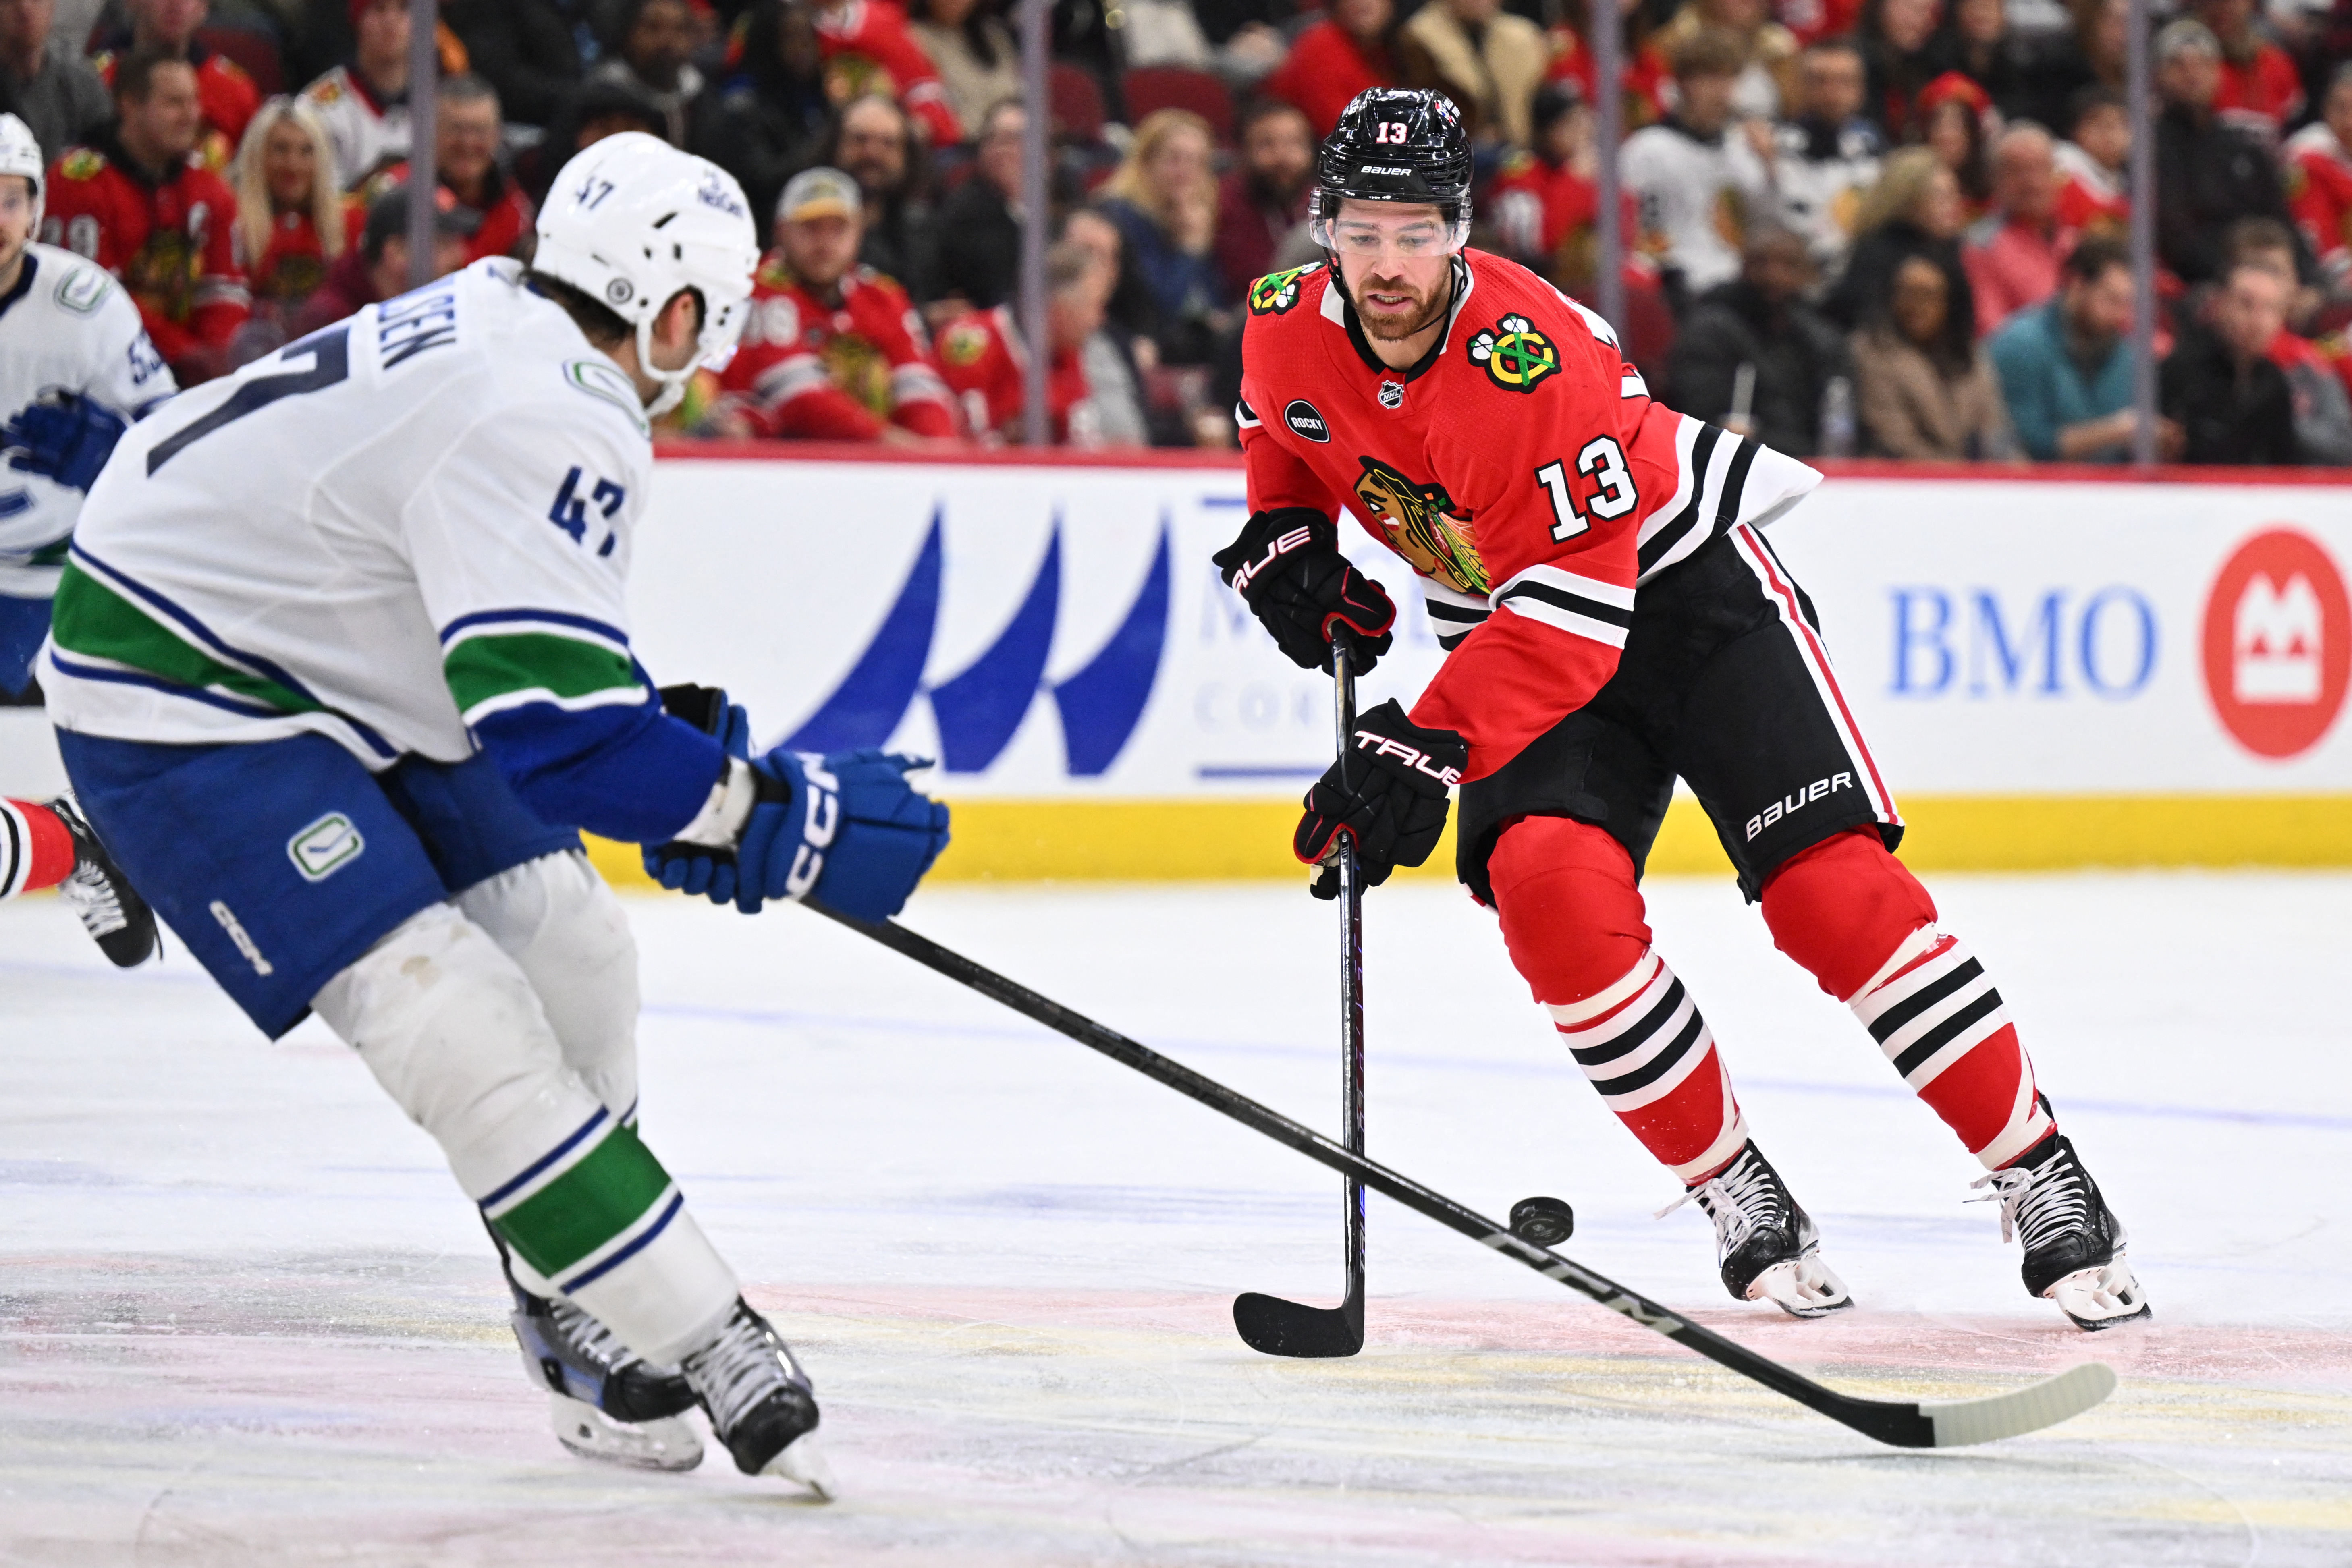 In battle of NHL's first and last, Canucks best Blackhawks - The Rink Live